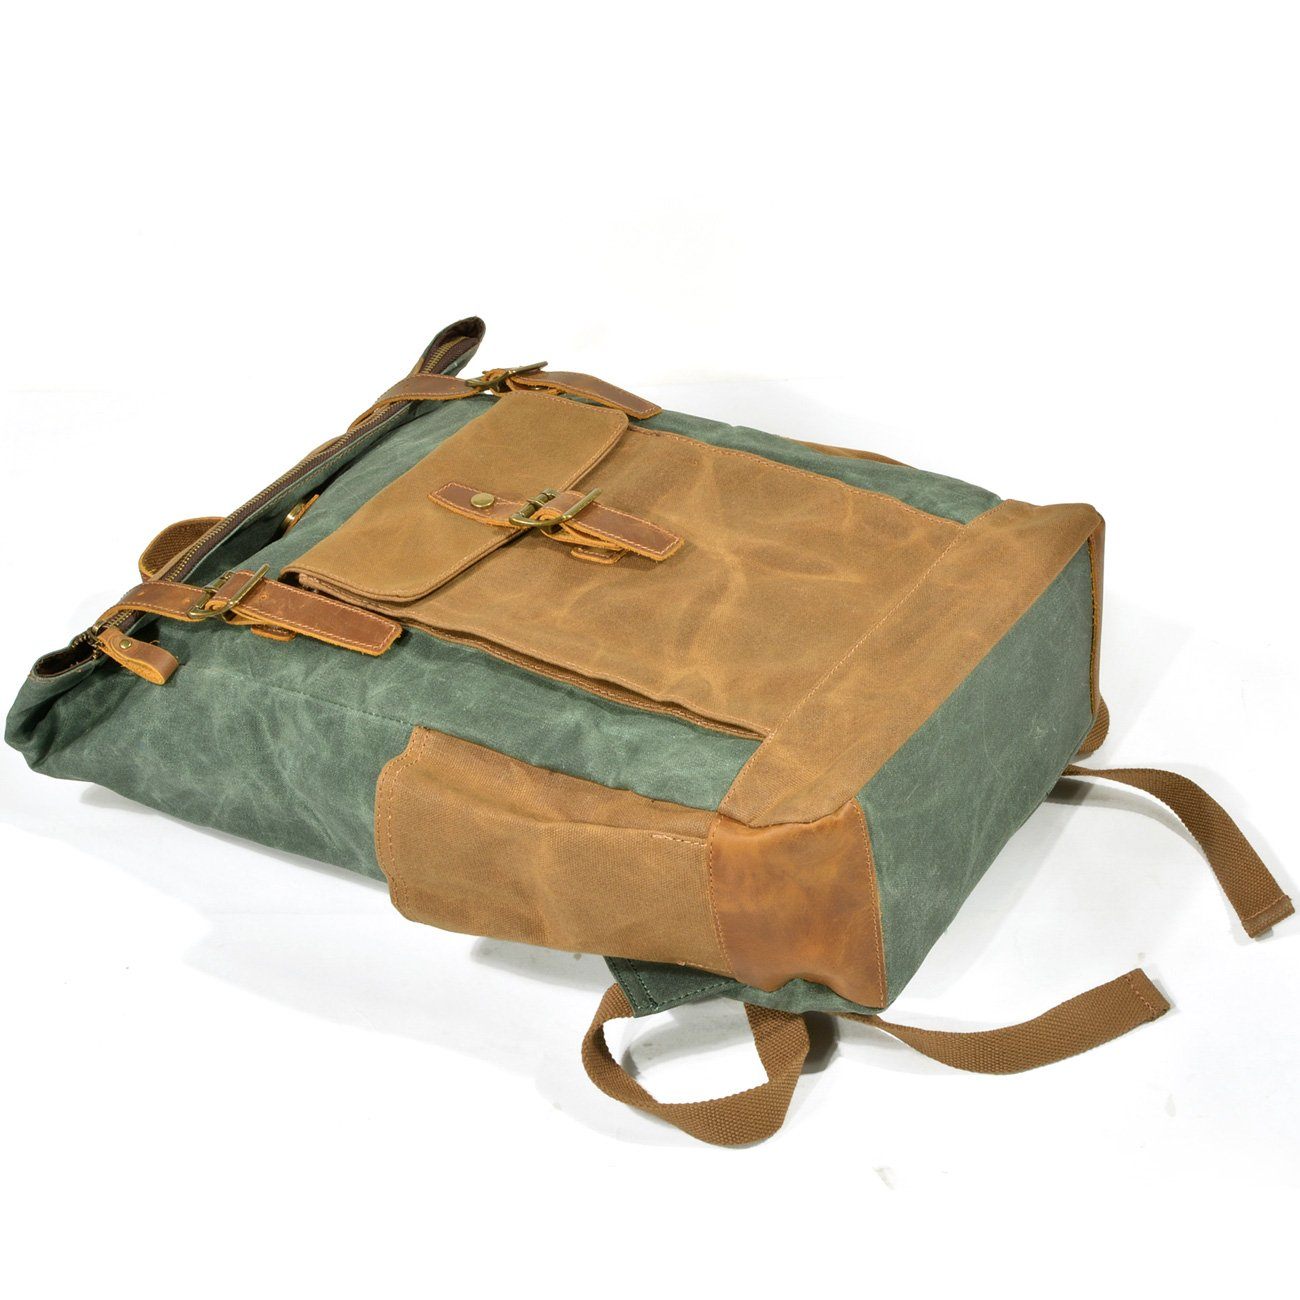 Vintage Roll Top Waxed Canvas Backpack